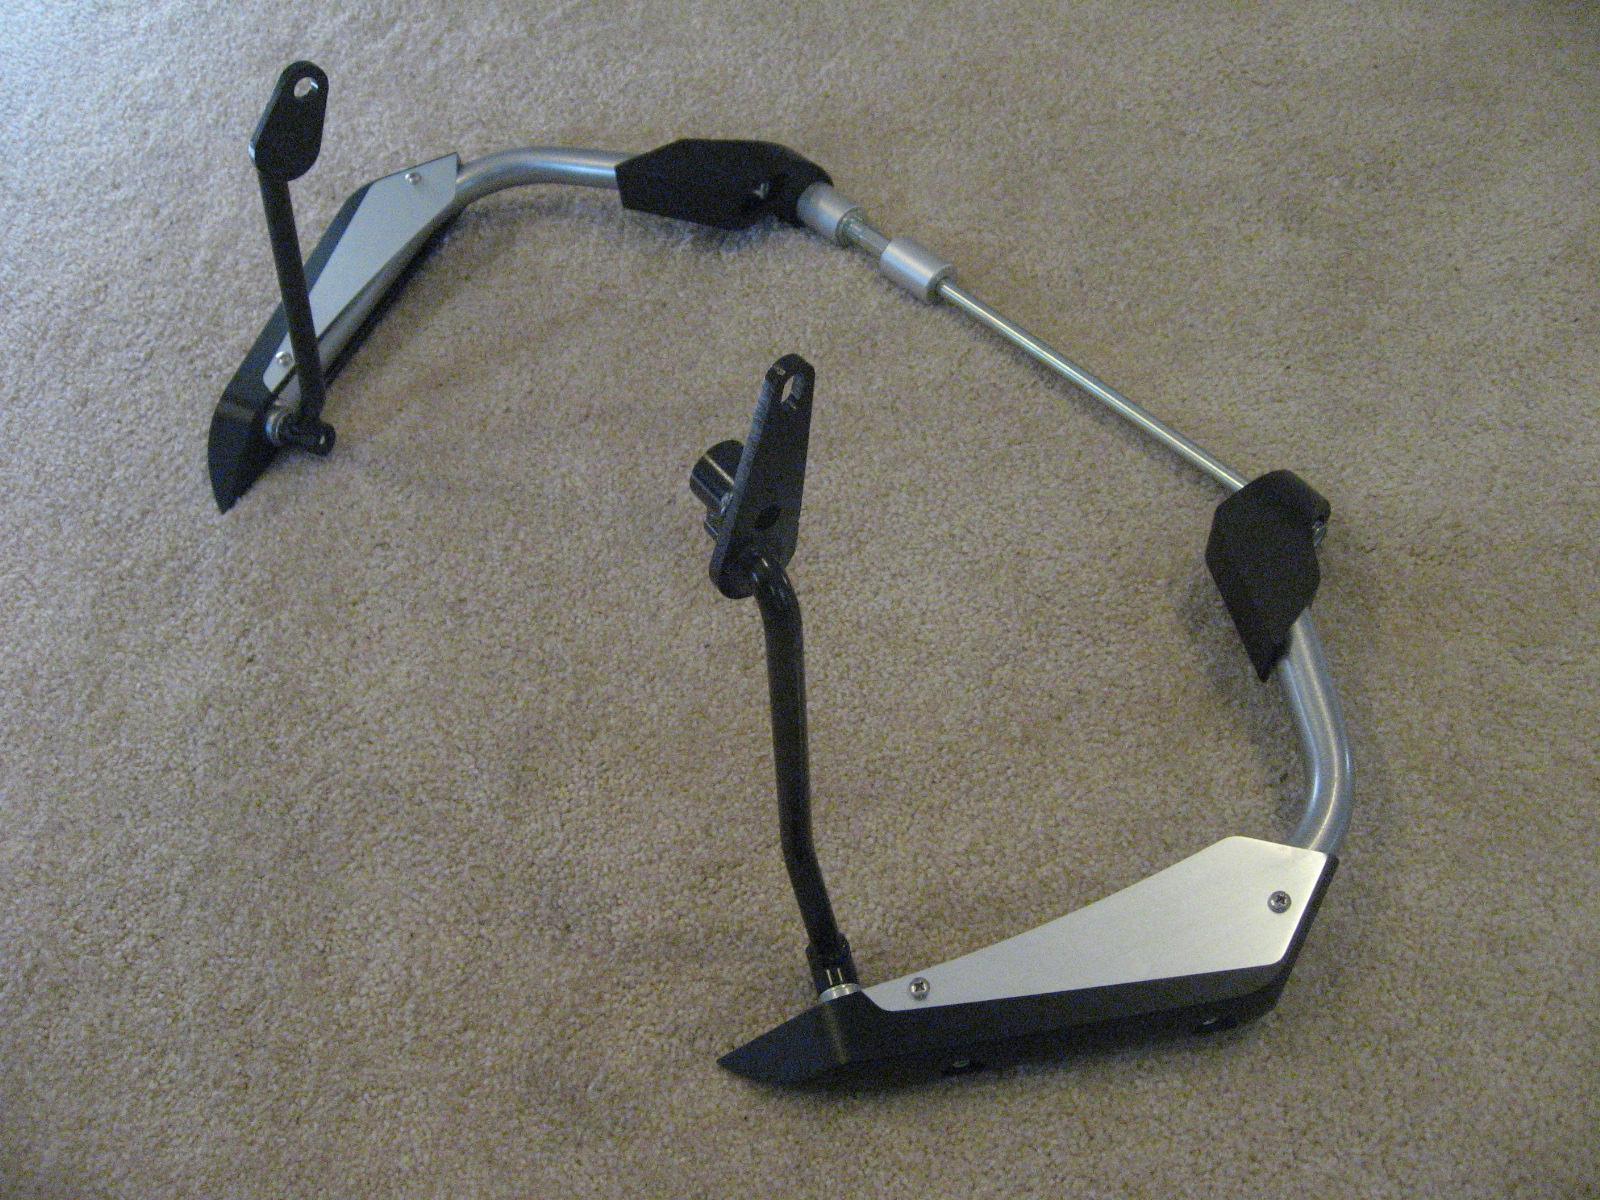 Here you can see what it looks like assembled and the frame connection bars